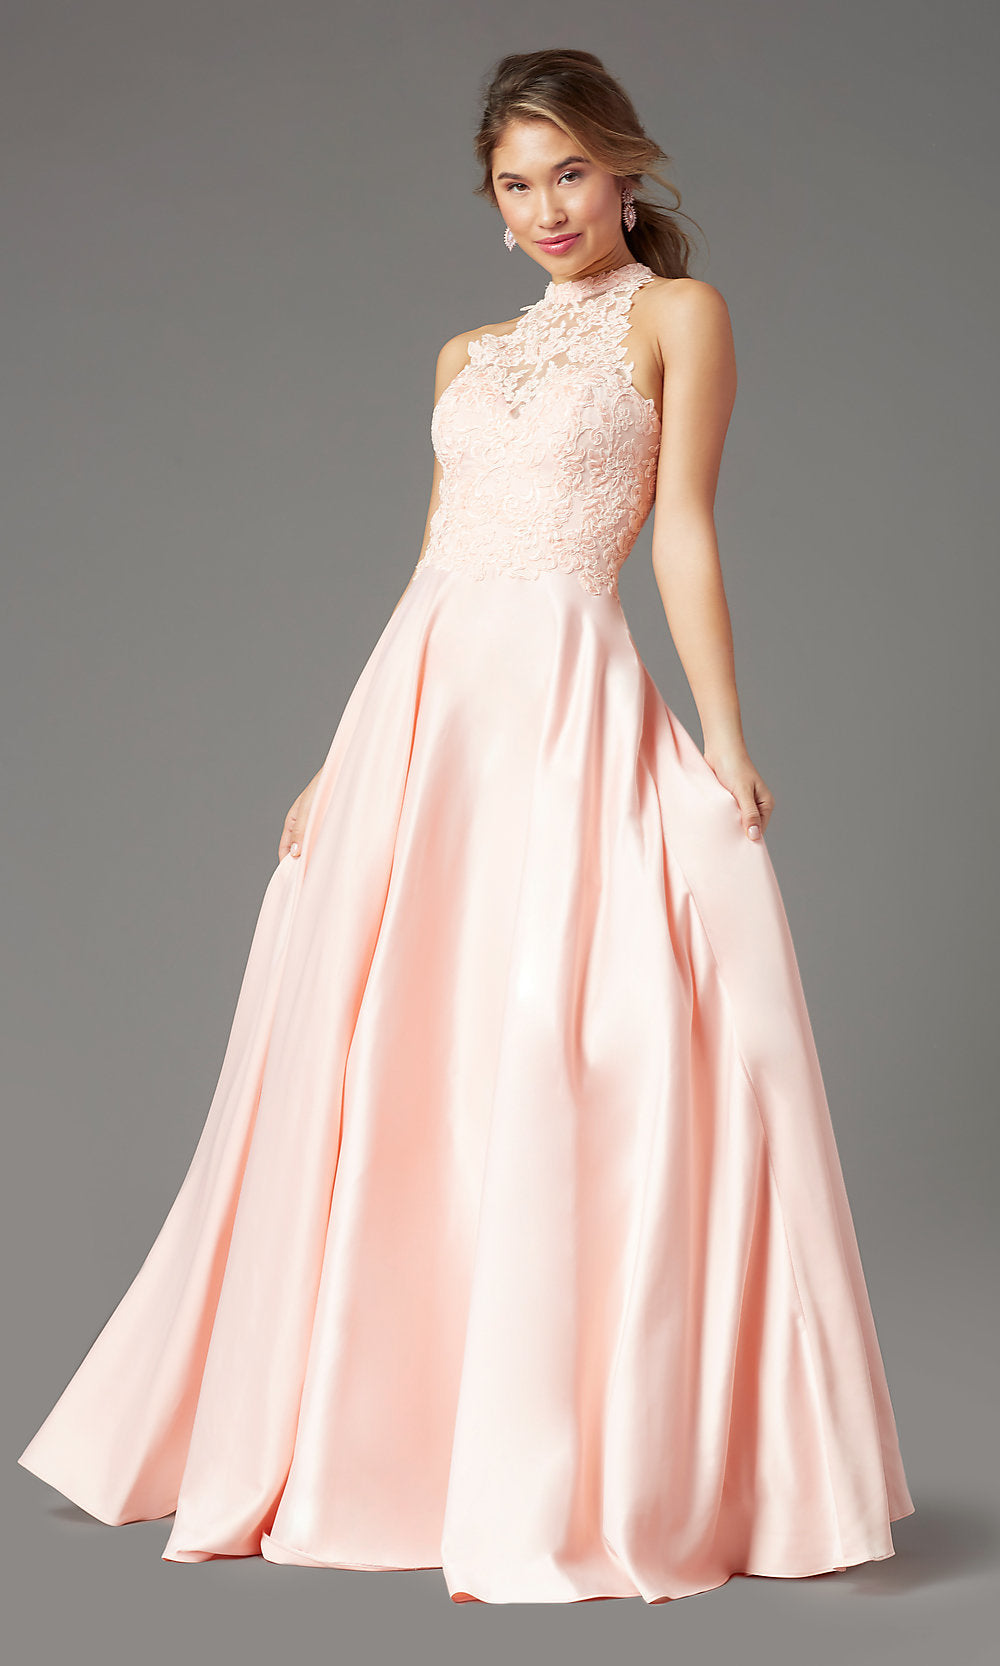 Long Embroidered-Bodice Prom Dress by PromGirl